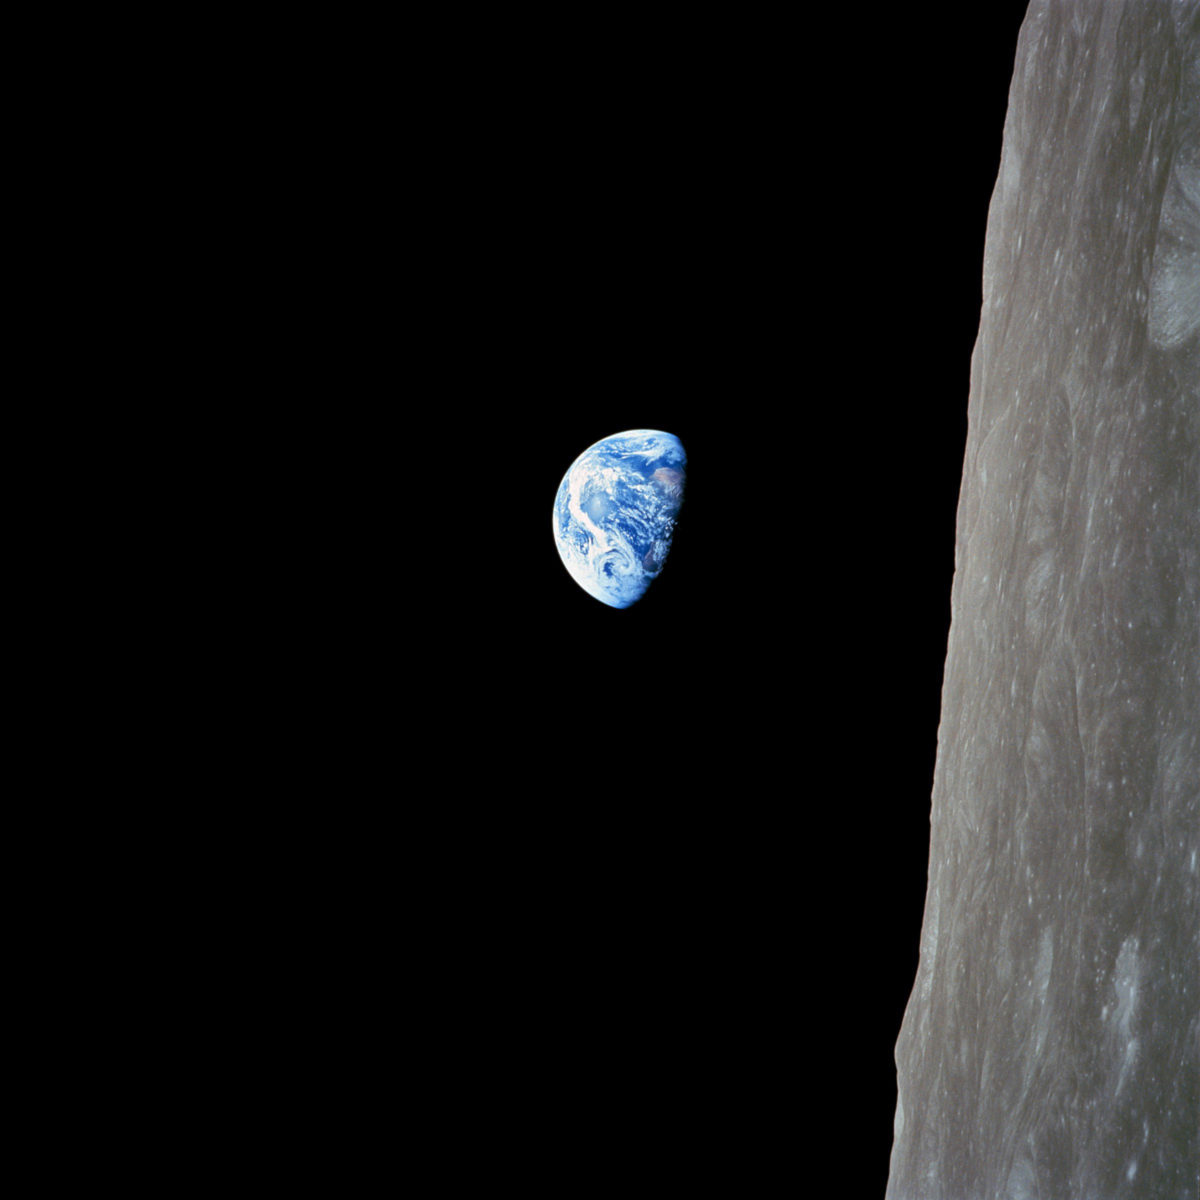 "Earthrise" from Apollo 8